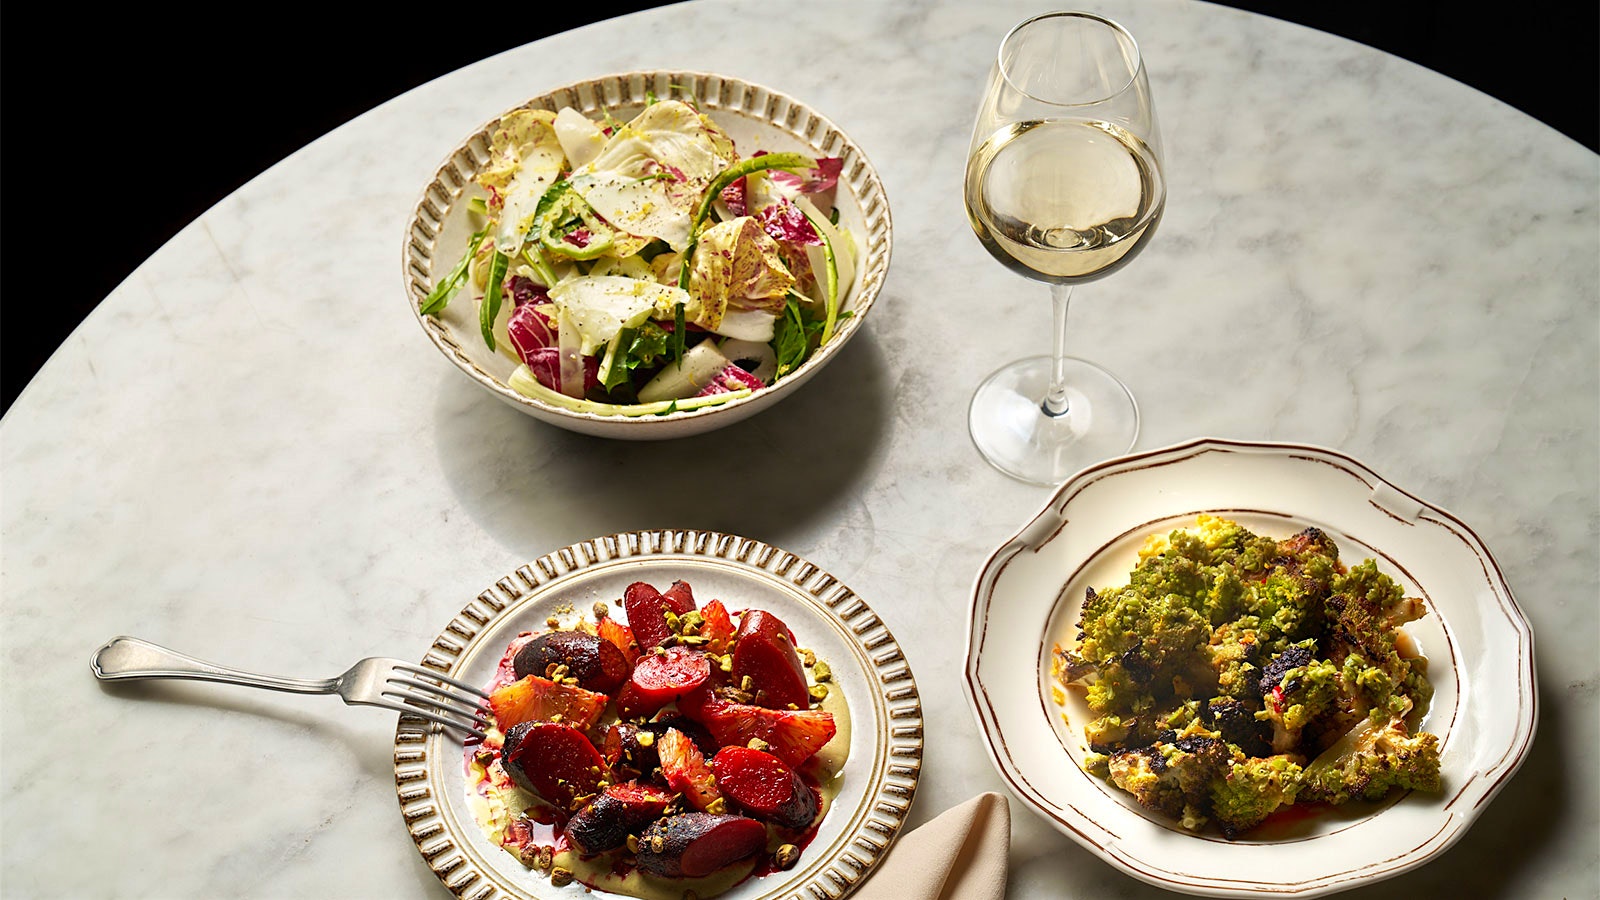  A table of vegetable dishes from Sempre Oggi like chicory salad, roasted beets and romanesco with a glass of white wine.